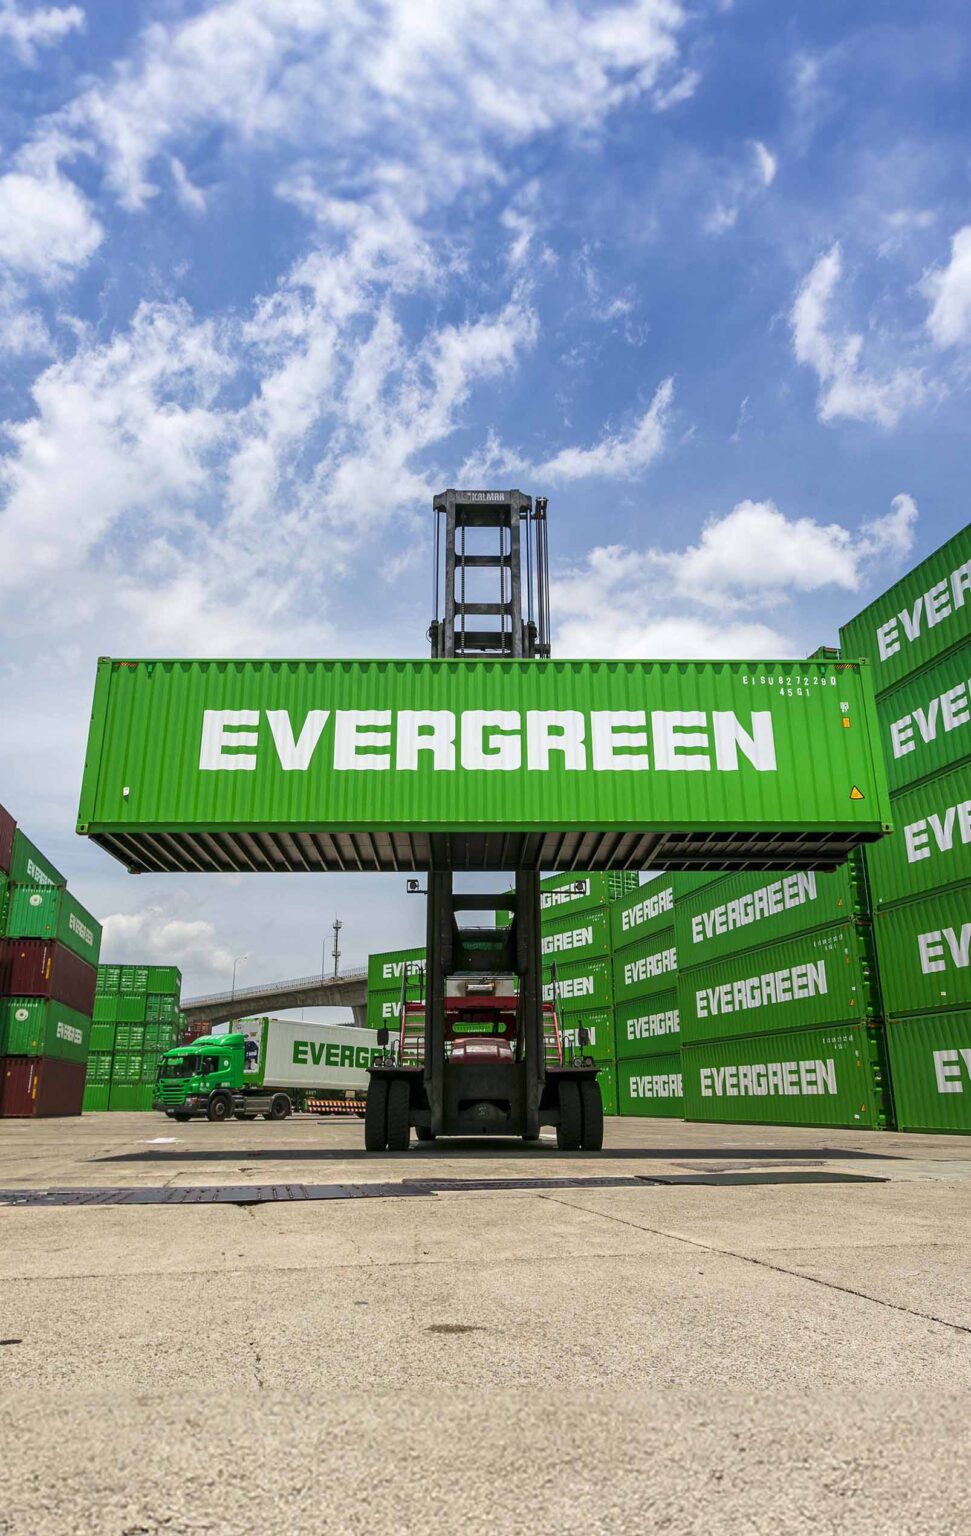 A straddle carrier is shown lifting a green container emblazoned with the white "EVERGREEN" logo. The machine is centered in the image, with a clear blue sky filled with white clouds overhead. In the background, there's a neatly arranged stack of similar green containers creating a vibrant, uniform backdrop. To the left, a green truck featuring the same logo is parked, adding to the busy logistics atmosphere of a container terminal. The concrete ground suggests a well-traveled industrial area.